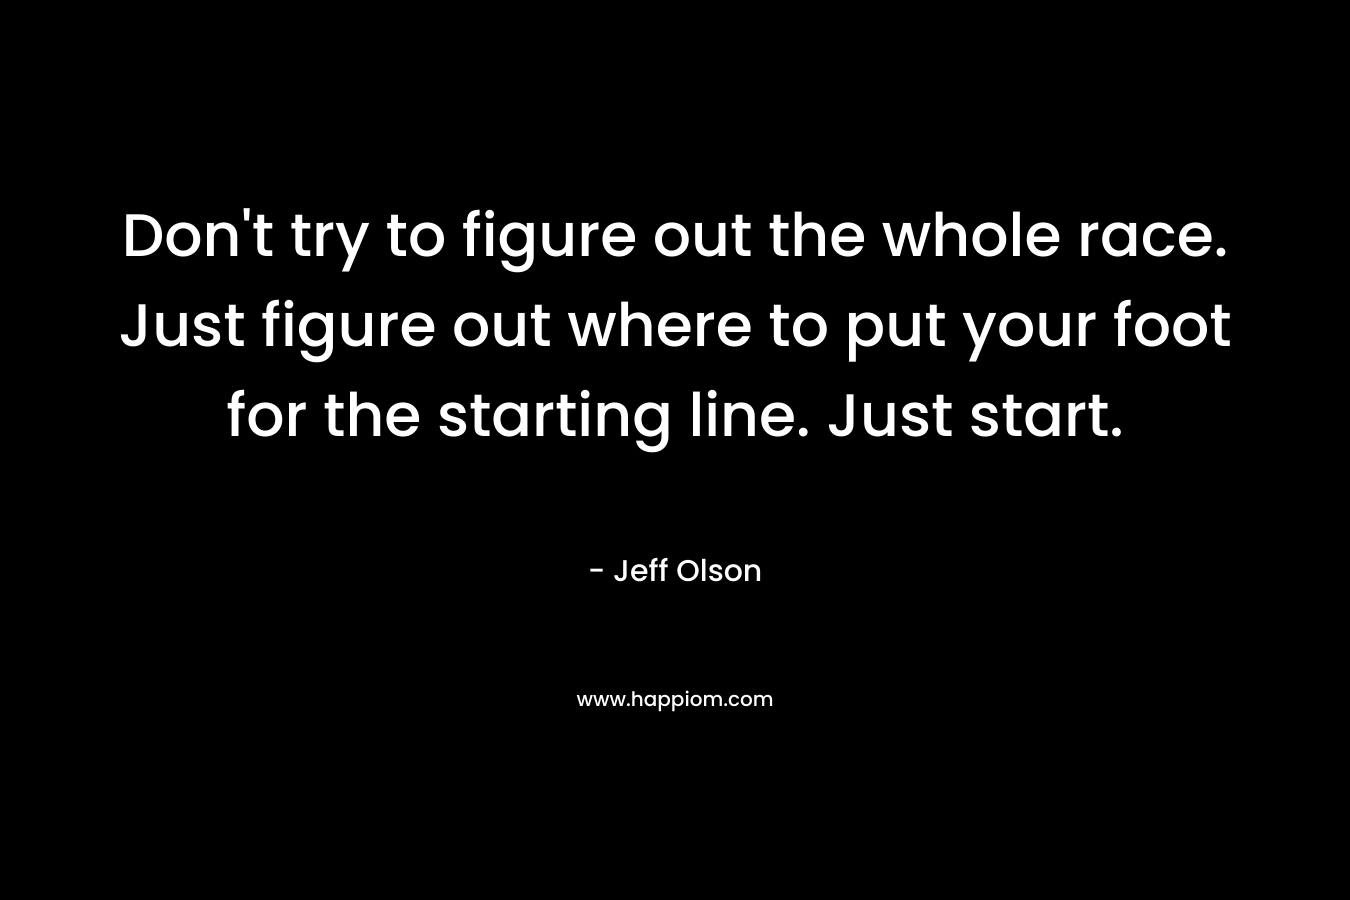 Don't try to figure out the whole race. Just figure out where to put your foot for the starting line. Just start.